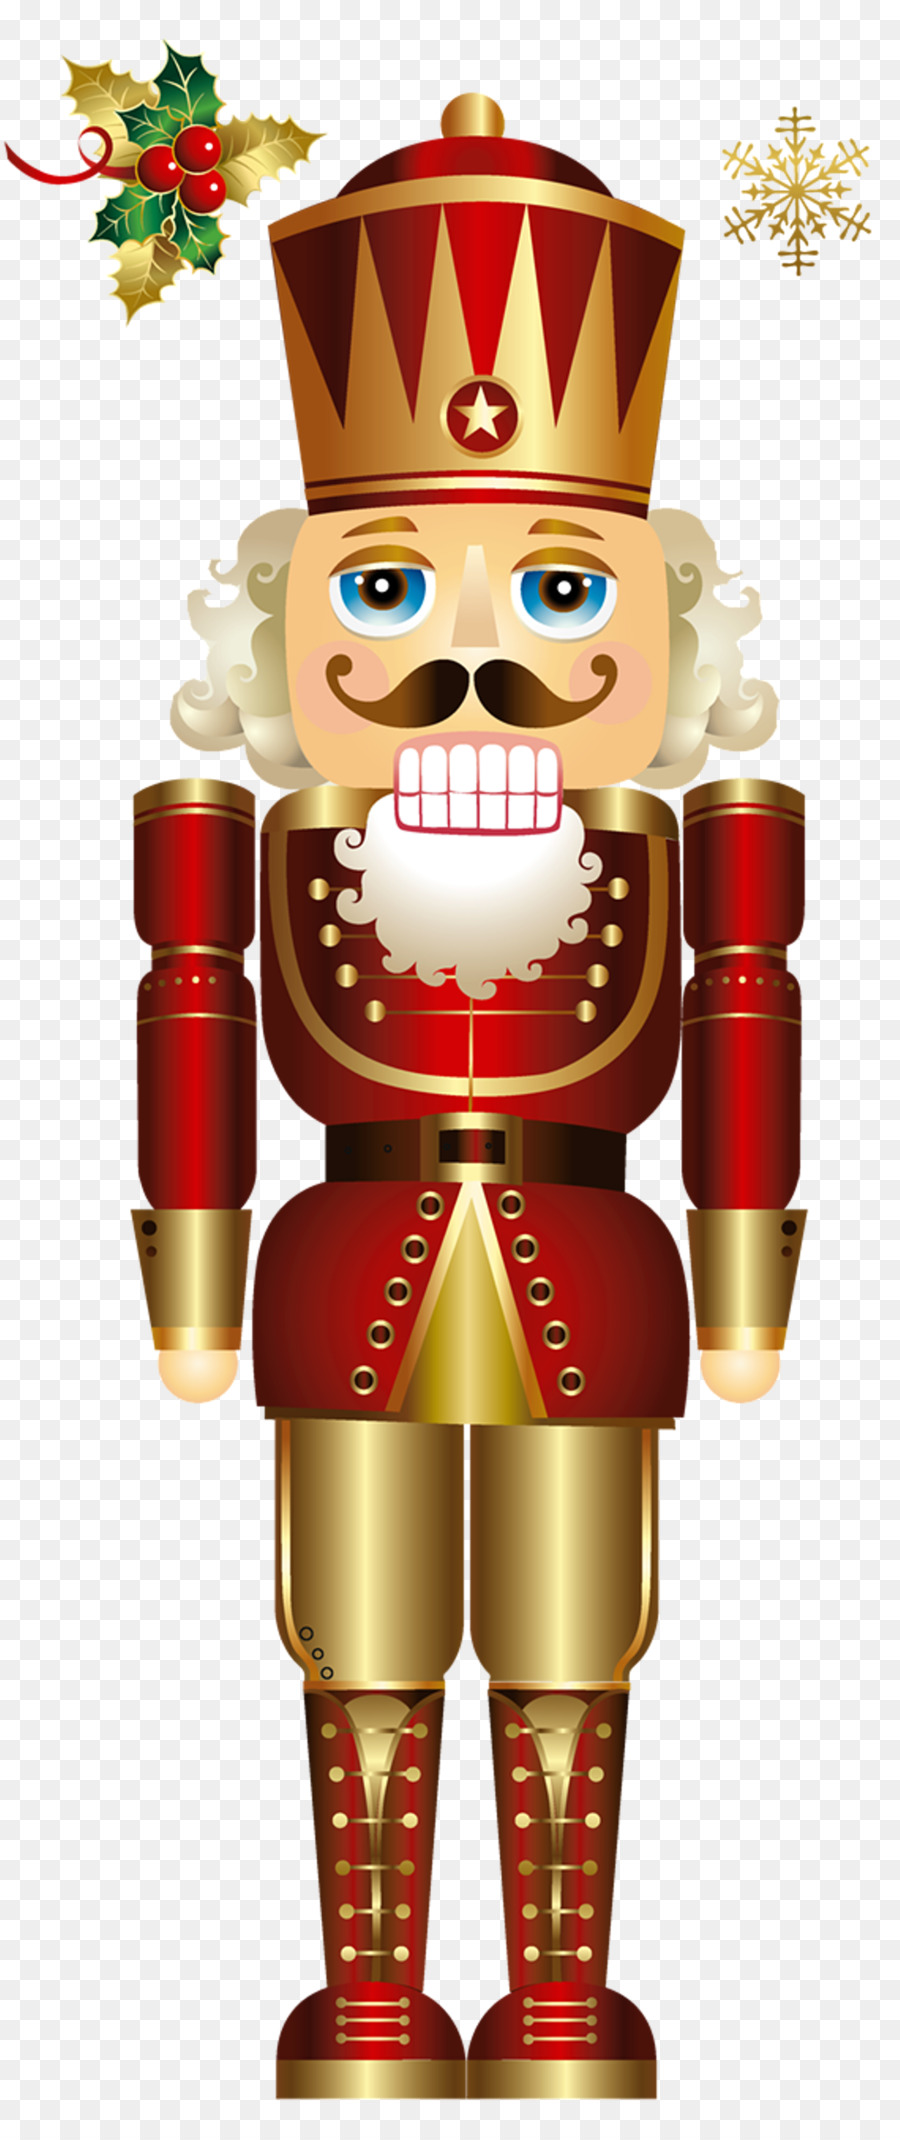 The Nutcracker and the Mouse King Nutcracker doll Clip art - Rehab Cliparts png download - 1280*3025 - Free Transparent Nutcracker And The Mouse King png Download.